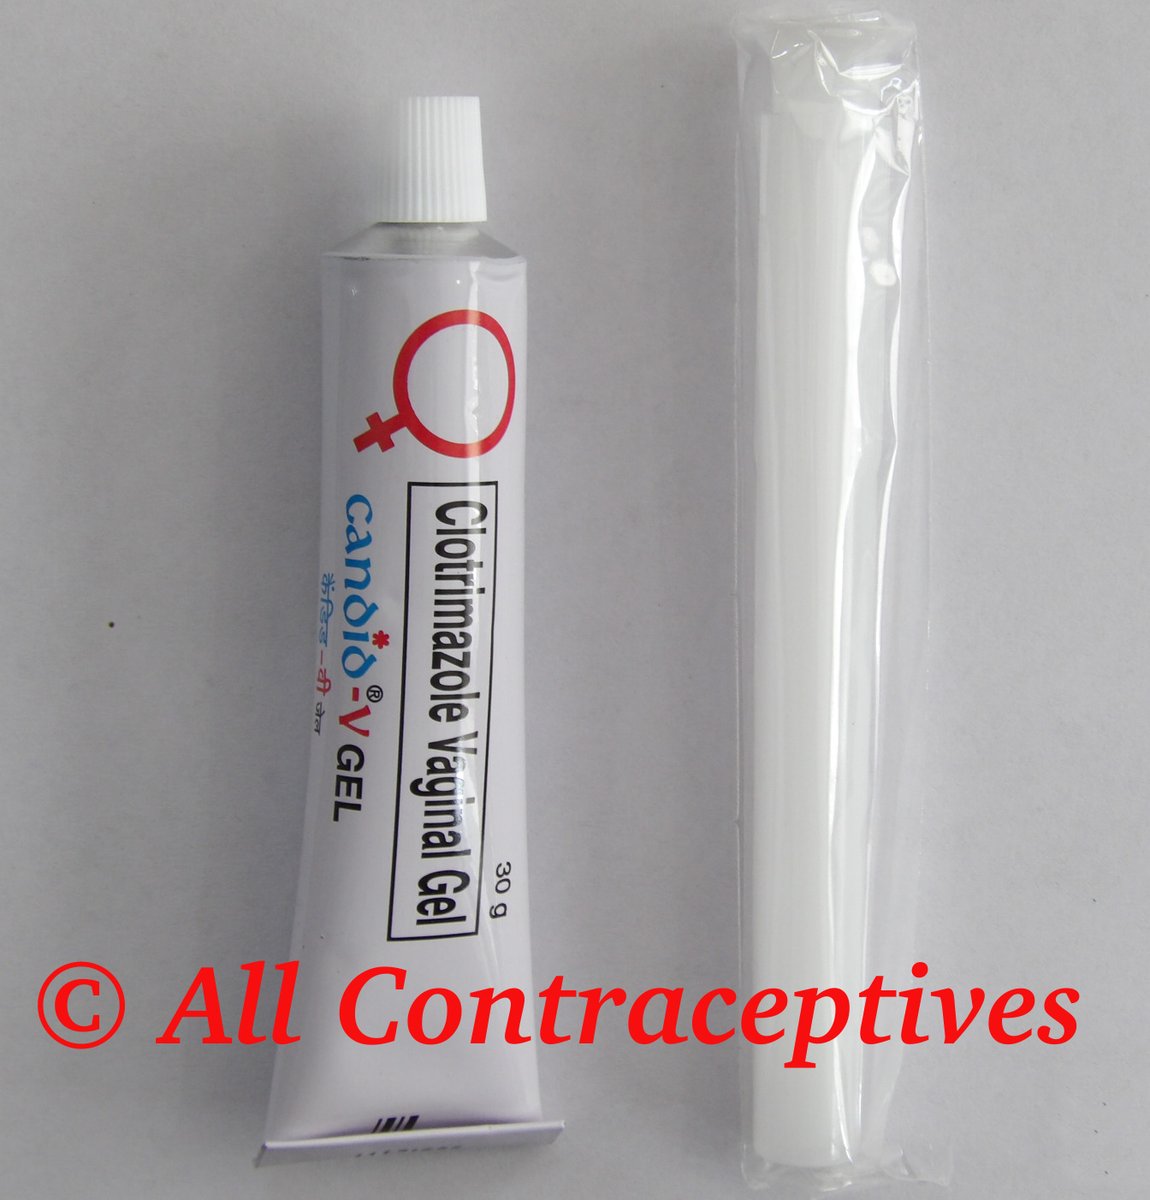 #CandidV (#GenericClotrimazole 2% #VaginalGel) is used to treat a #fungalinfection in the vagina and vulval area (#thrush) #vaginalfungalinfection  
allcontraceptives.com/clotrimazole-v…